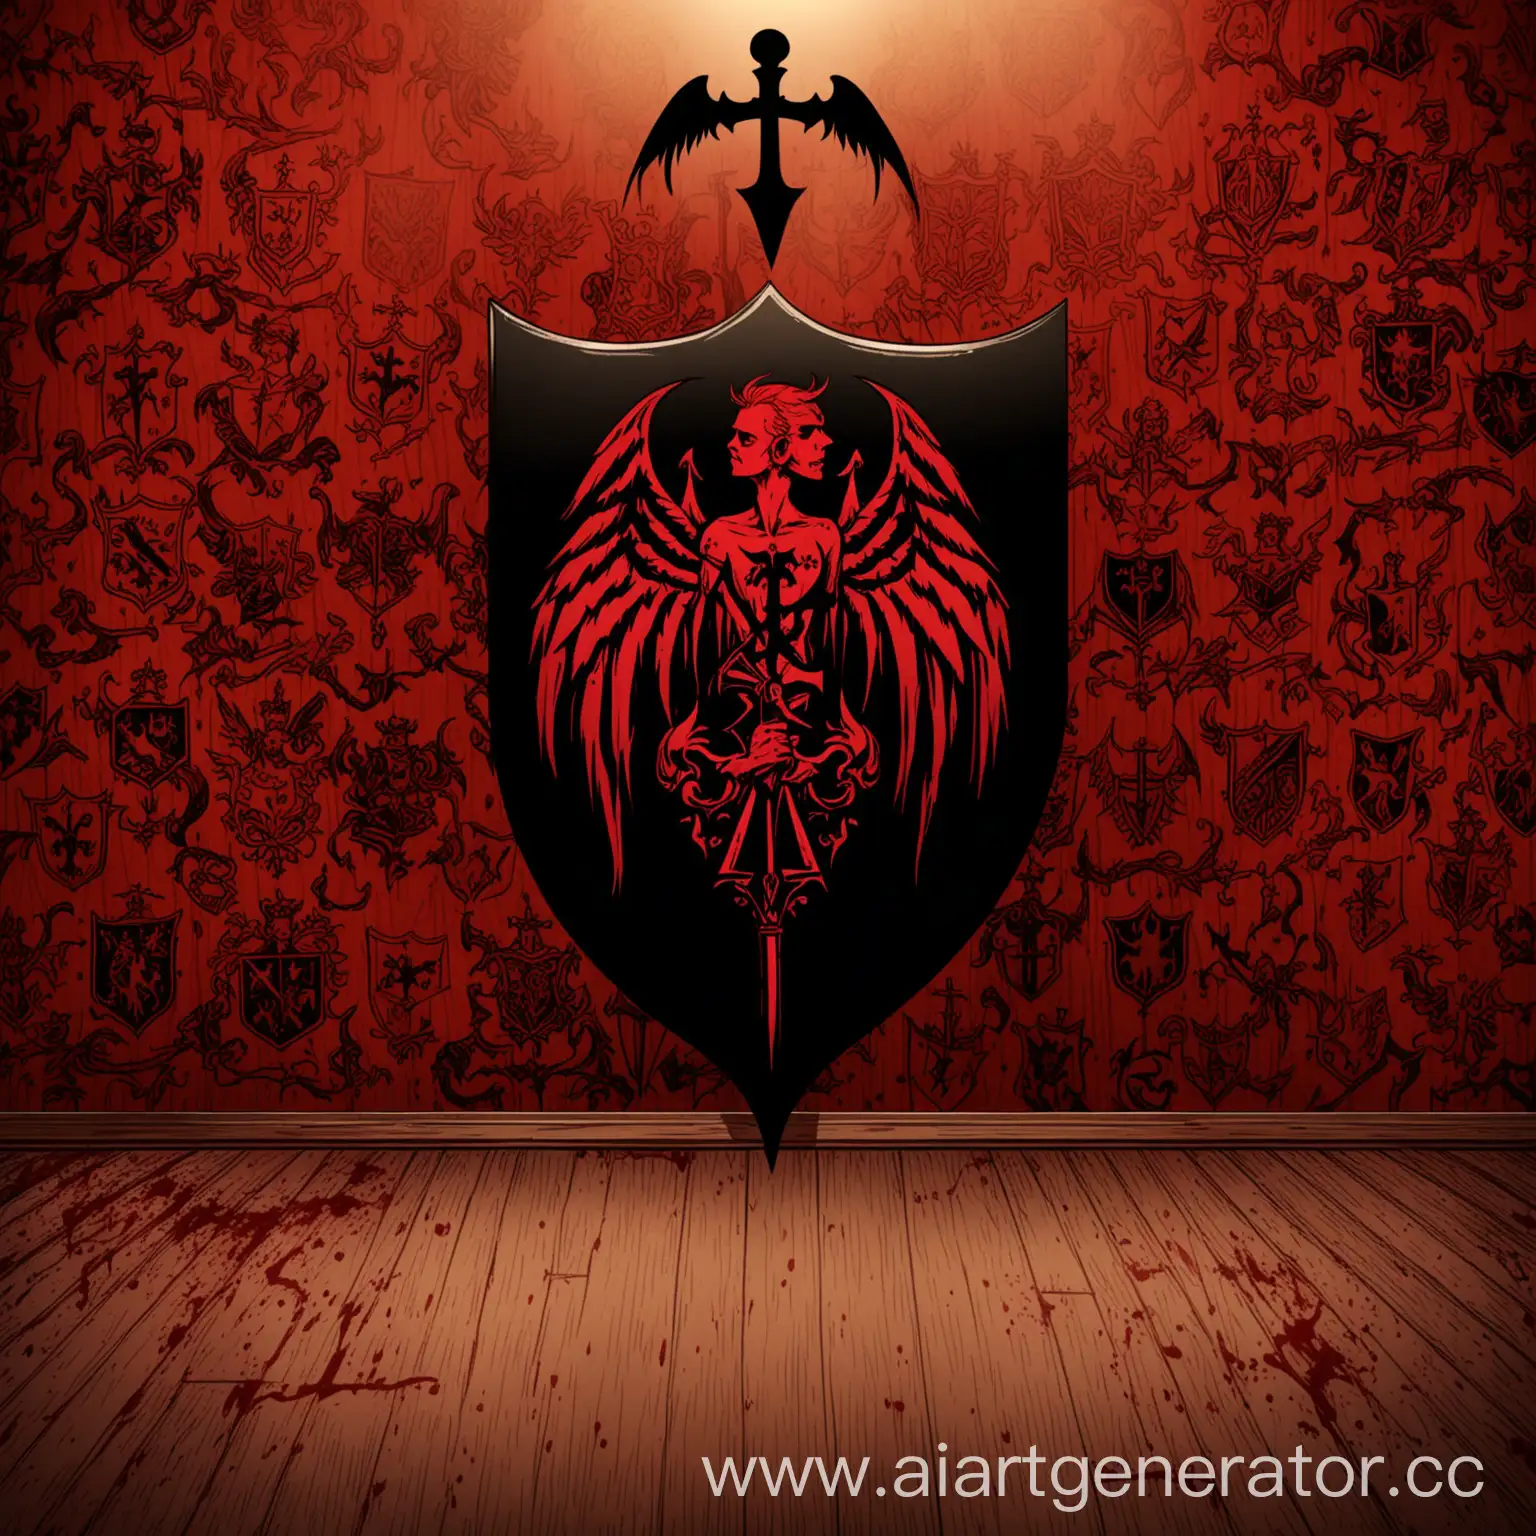 Room-with-Red-Walls-and-Coat-of-Arms-Featuring-Angel-and-Demon